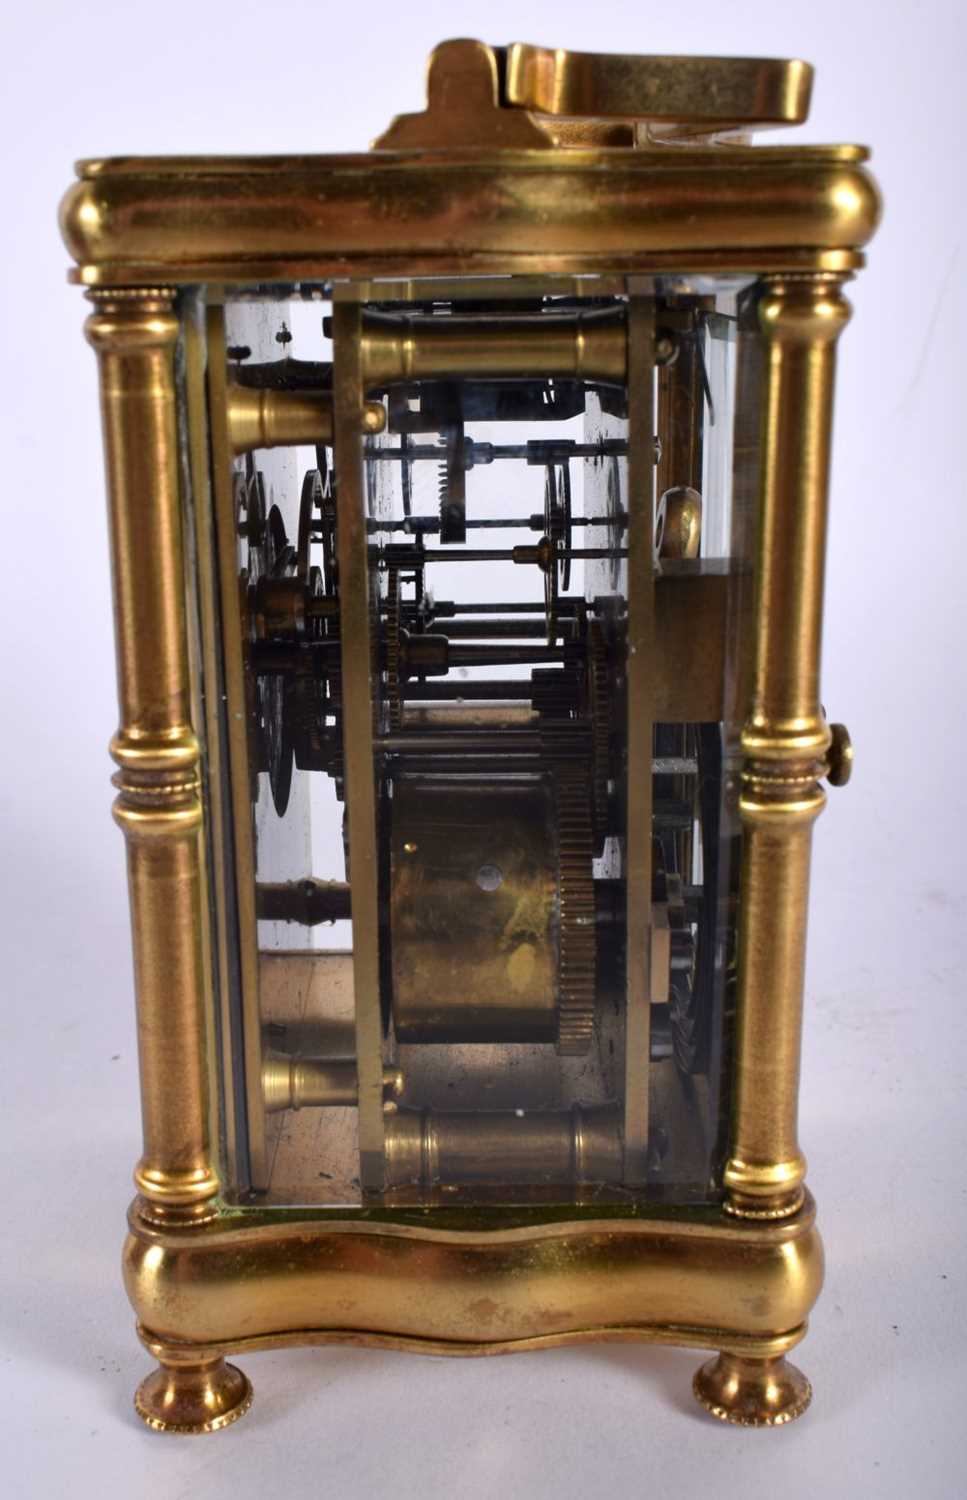 A CASED ANTIQUE BRASS CARRIAGE CLOCK. 14.5 cm high inc handle. - Image 3 of 7